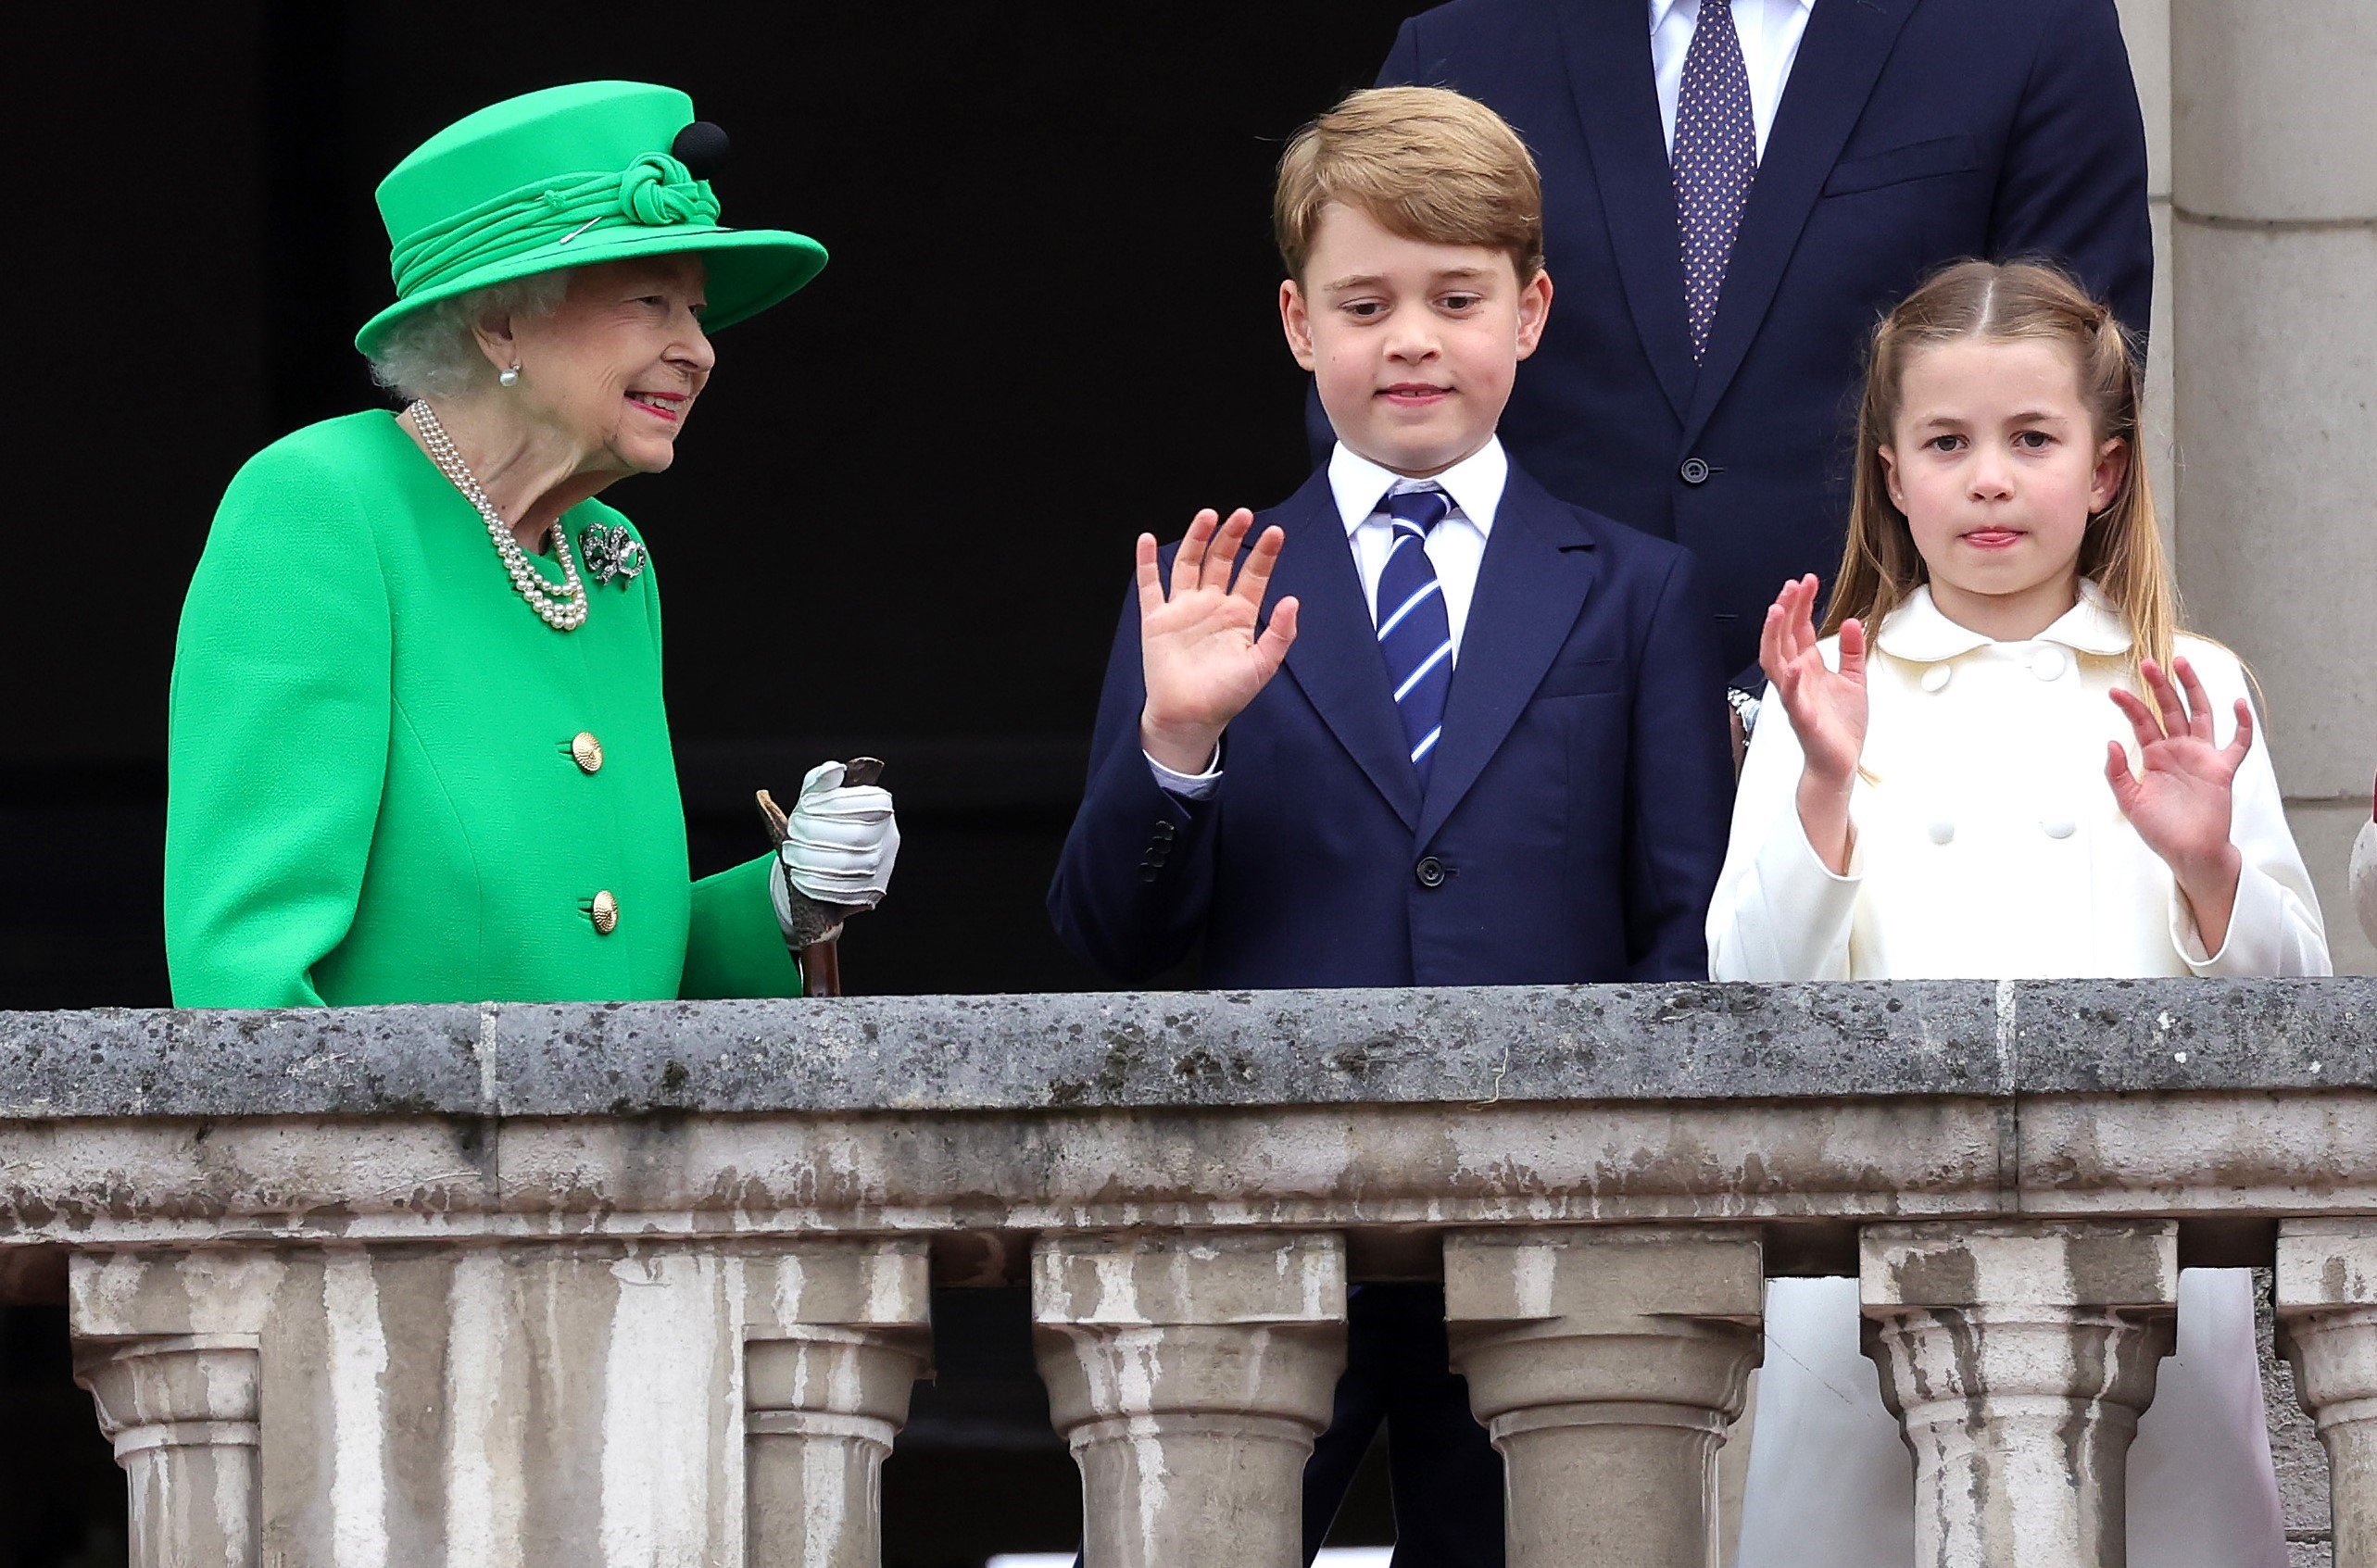 Expert Explains How Princess Charlotte Hints That She Uses Queen Elizabeth as Her ‘Body Language Role Model’